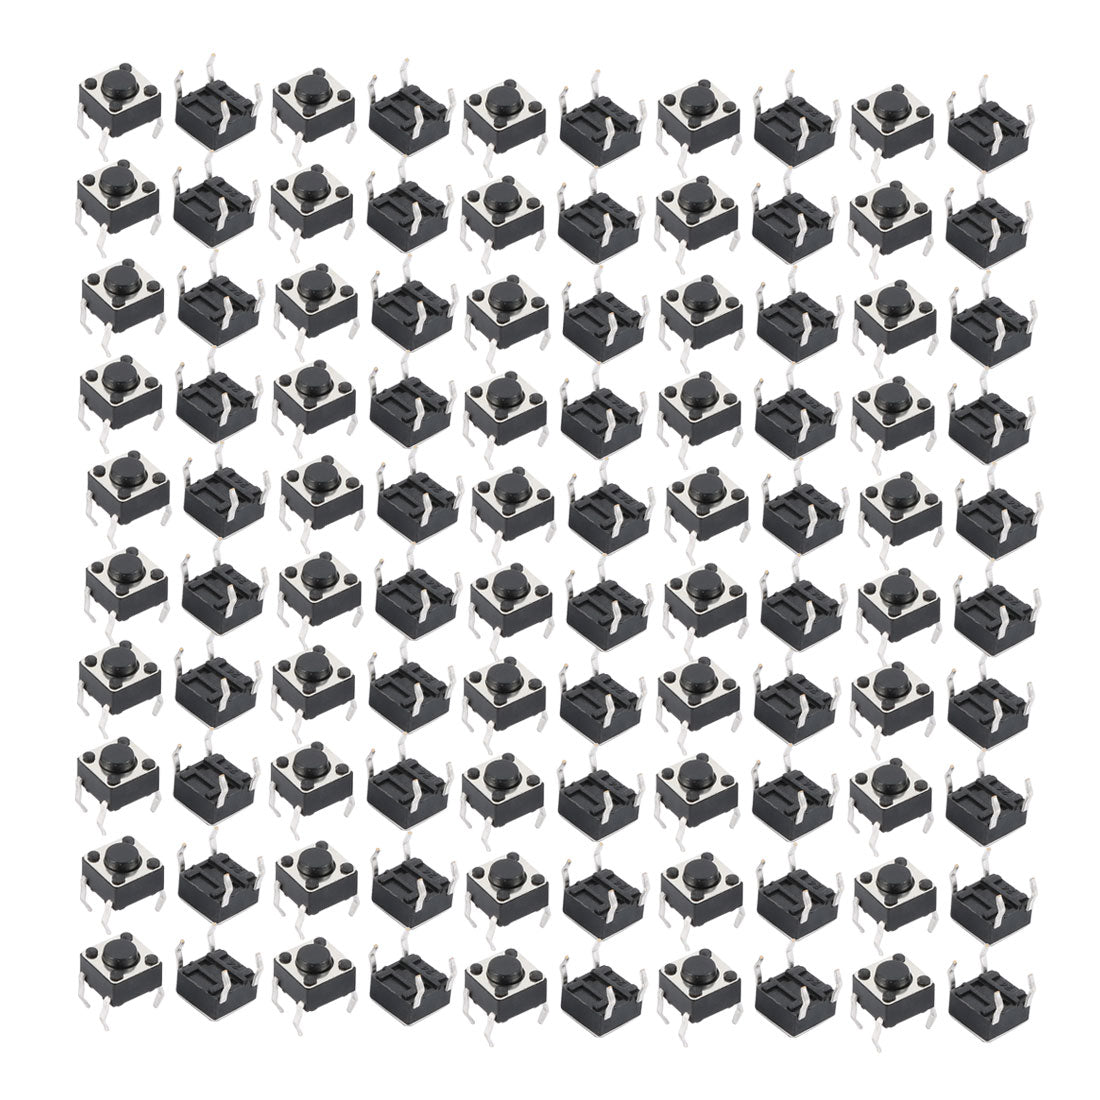 uxcell Uxcell 100 Pcs 6x6x4.5mm Panel PCB Momentary Tactile Tact Push Button Switch 4 Pin DIP